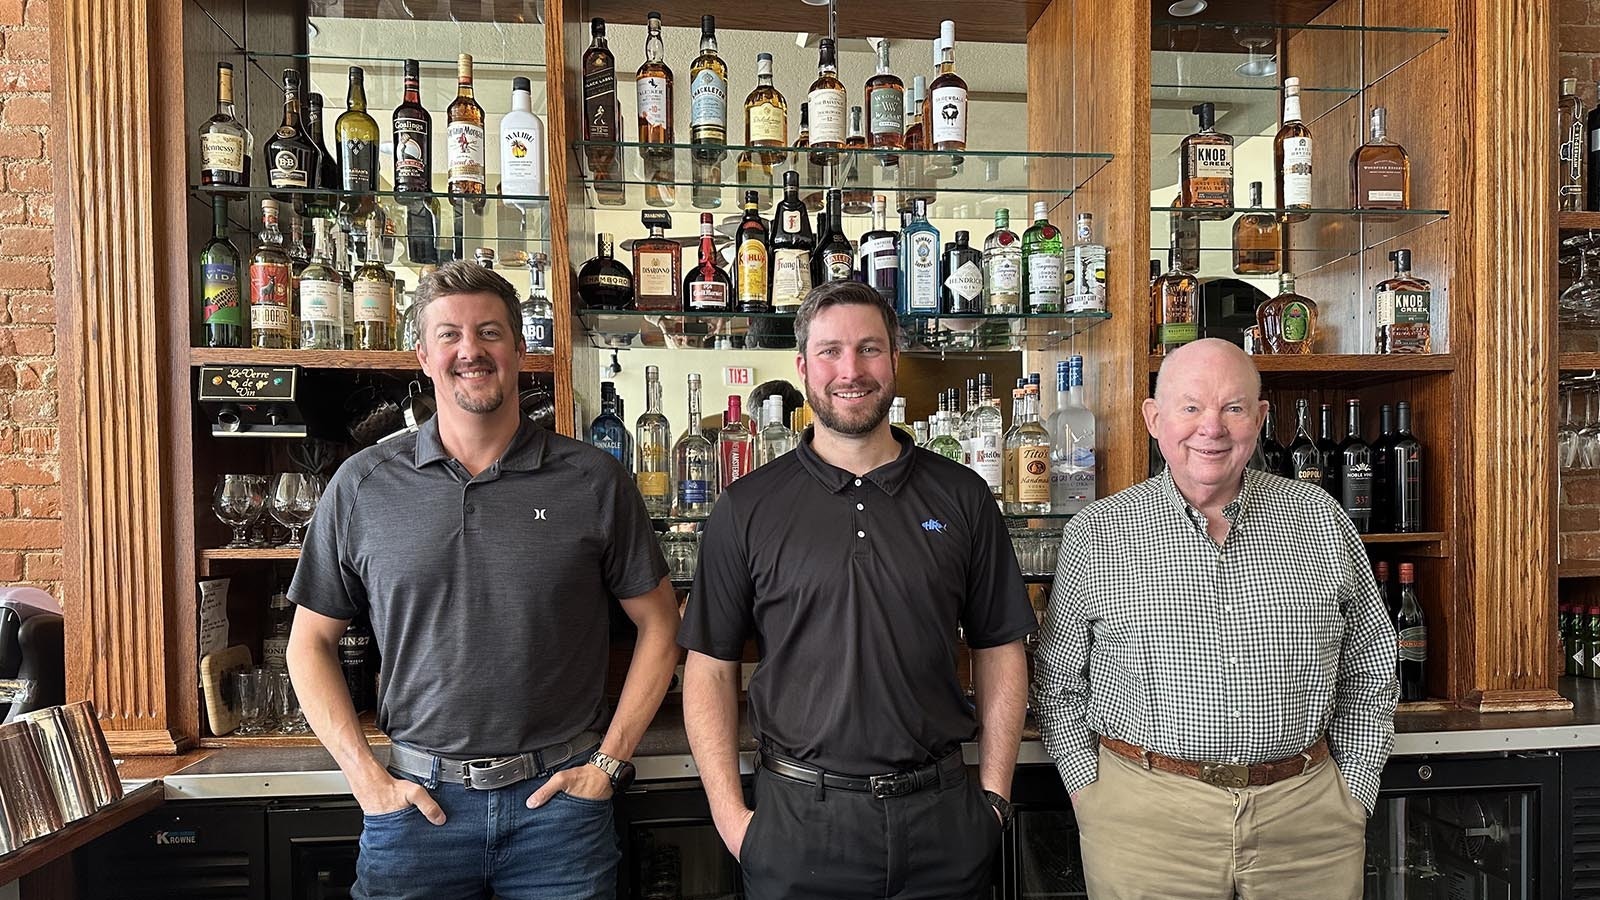 Co-owner Ryan Winner, from left, general manager Tim Kerr and co-owner Kim Love of Frackelton's Fine Food & Spirits in Sheridan. Not pictured is co-owner Tanner Beemer.